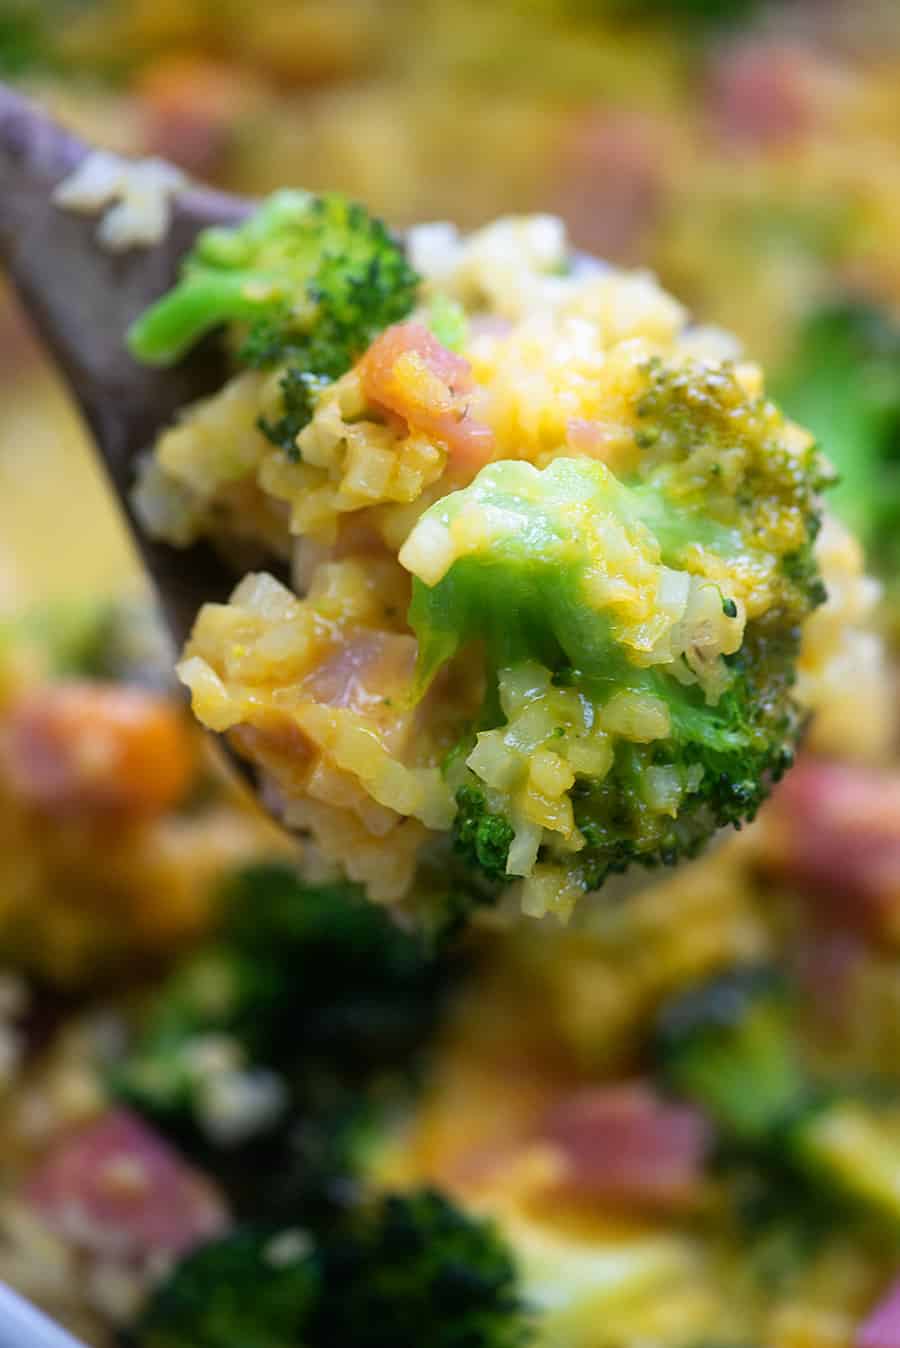 Low carb ham and cheese casserole! Total comfort food and it's packed full of veggies! #lowcarb #keto #broccoli